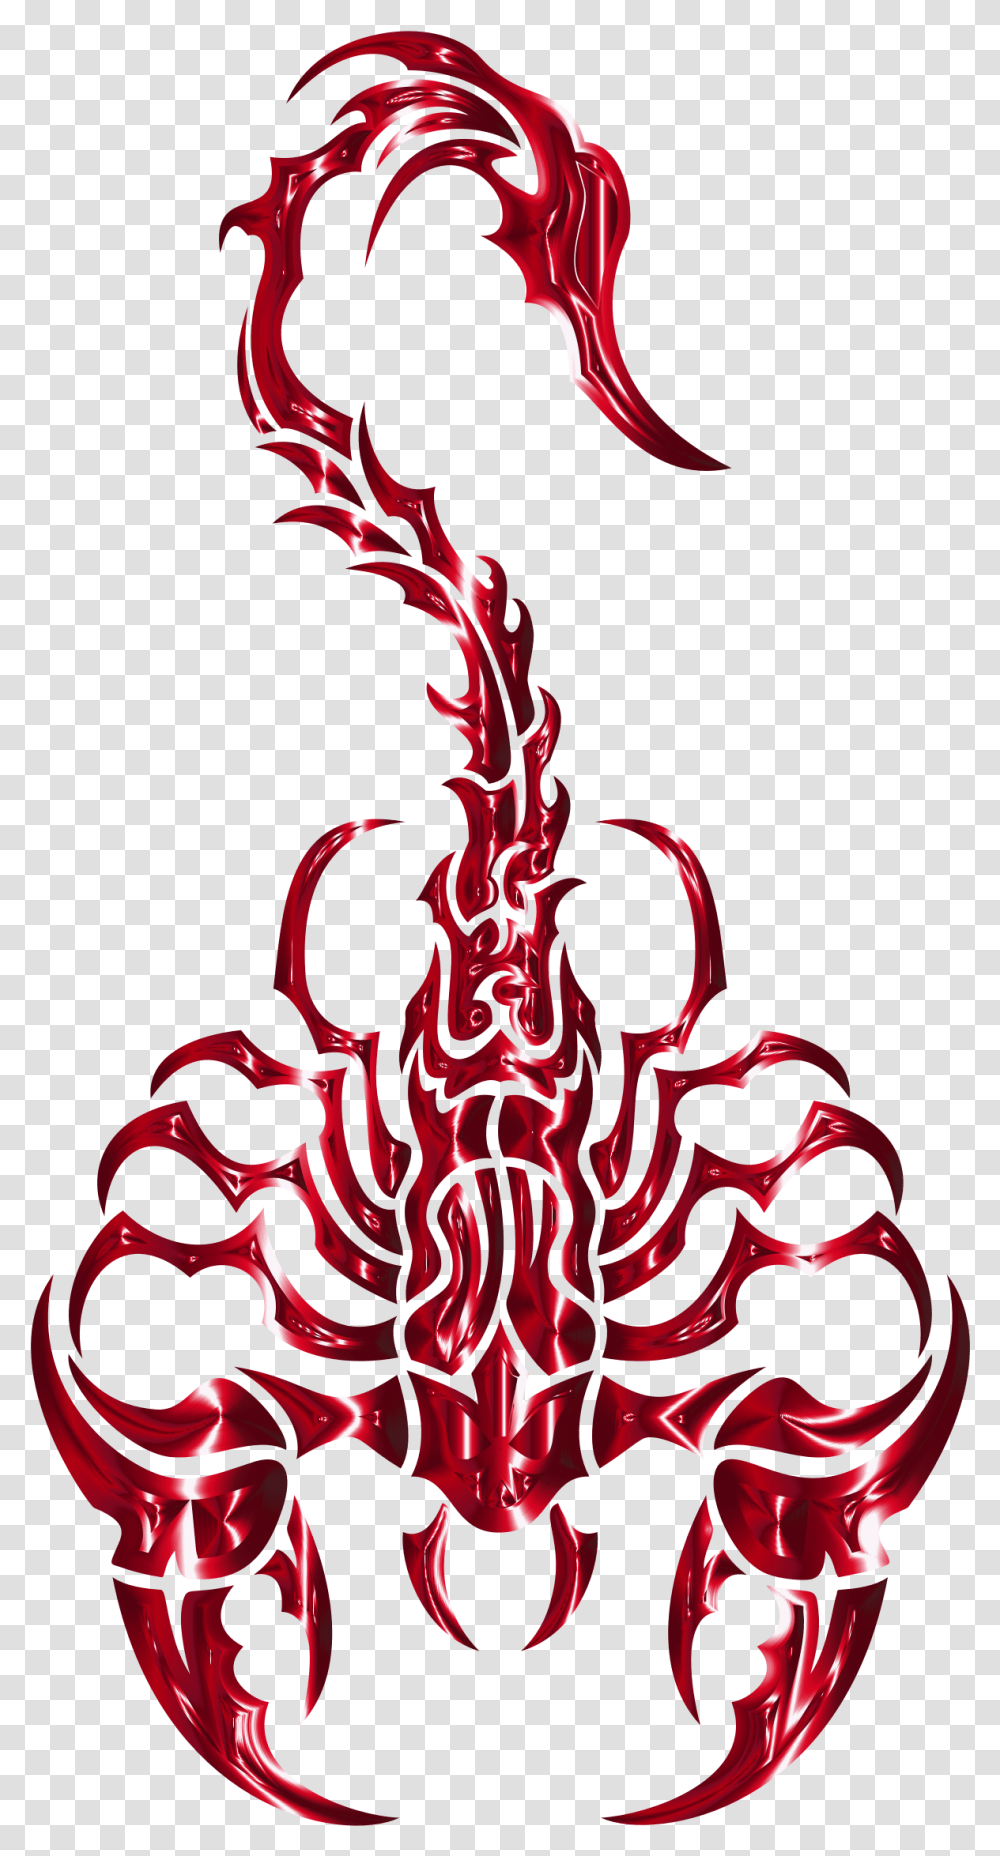 Download Red Scorpio Symbol Image For Free Tribal Scorpion, Hook, Dragon, Hand, Dynamite Transparent Png